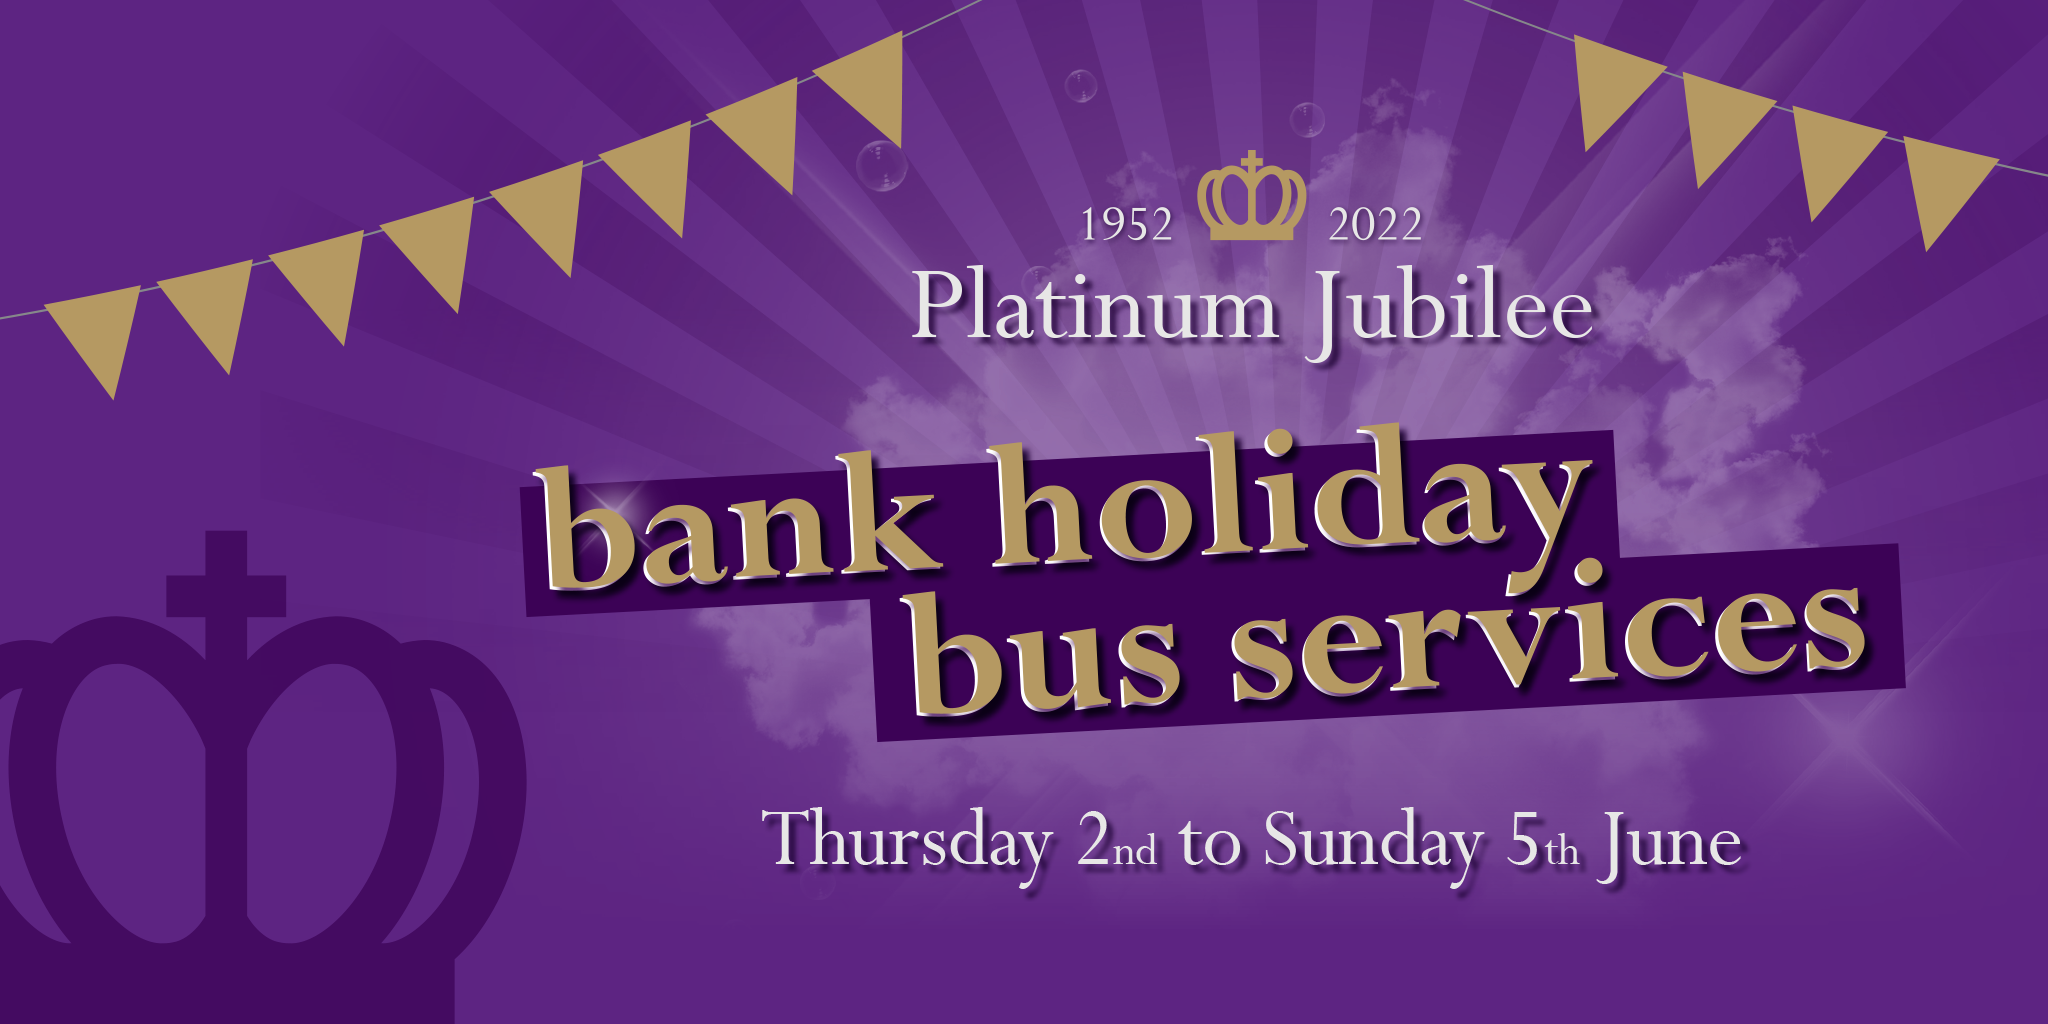 platinum jubilee bank holiday bus services: thursday 2nd to sunday 5th june